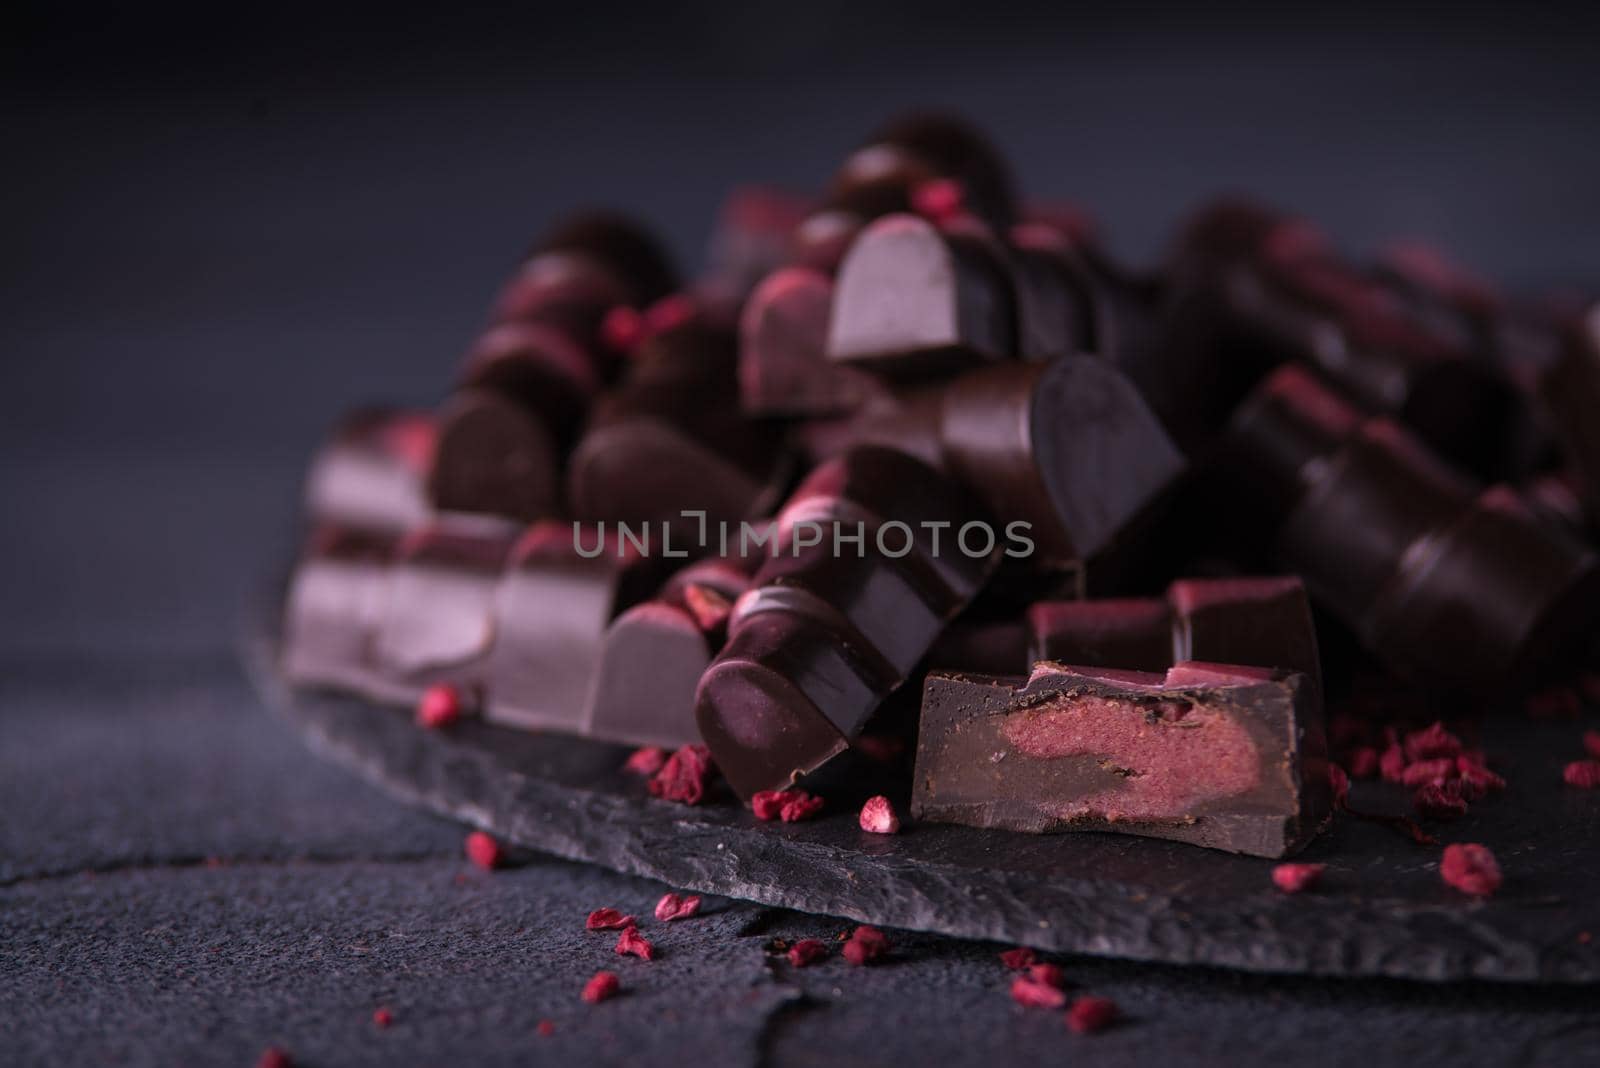 chocolate homemade candies with raspberry fillings. dark food photo